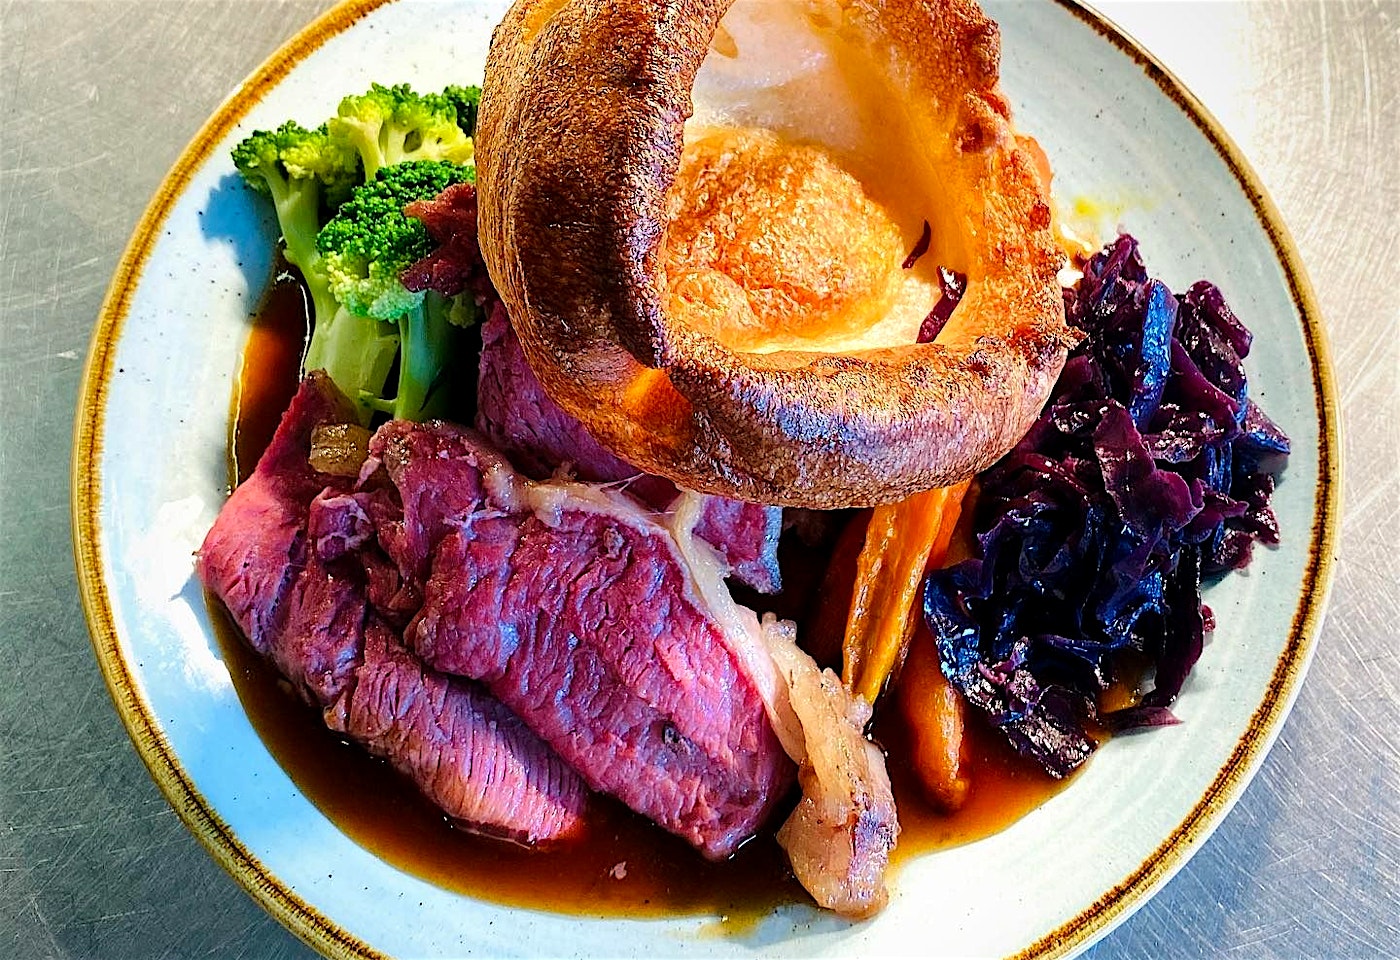 the-cat-and-mutton-hackney-london-bar-roast-dinner